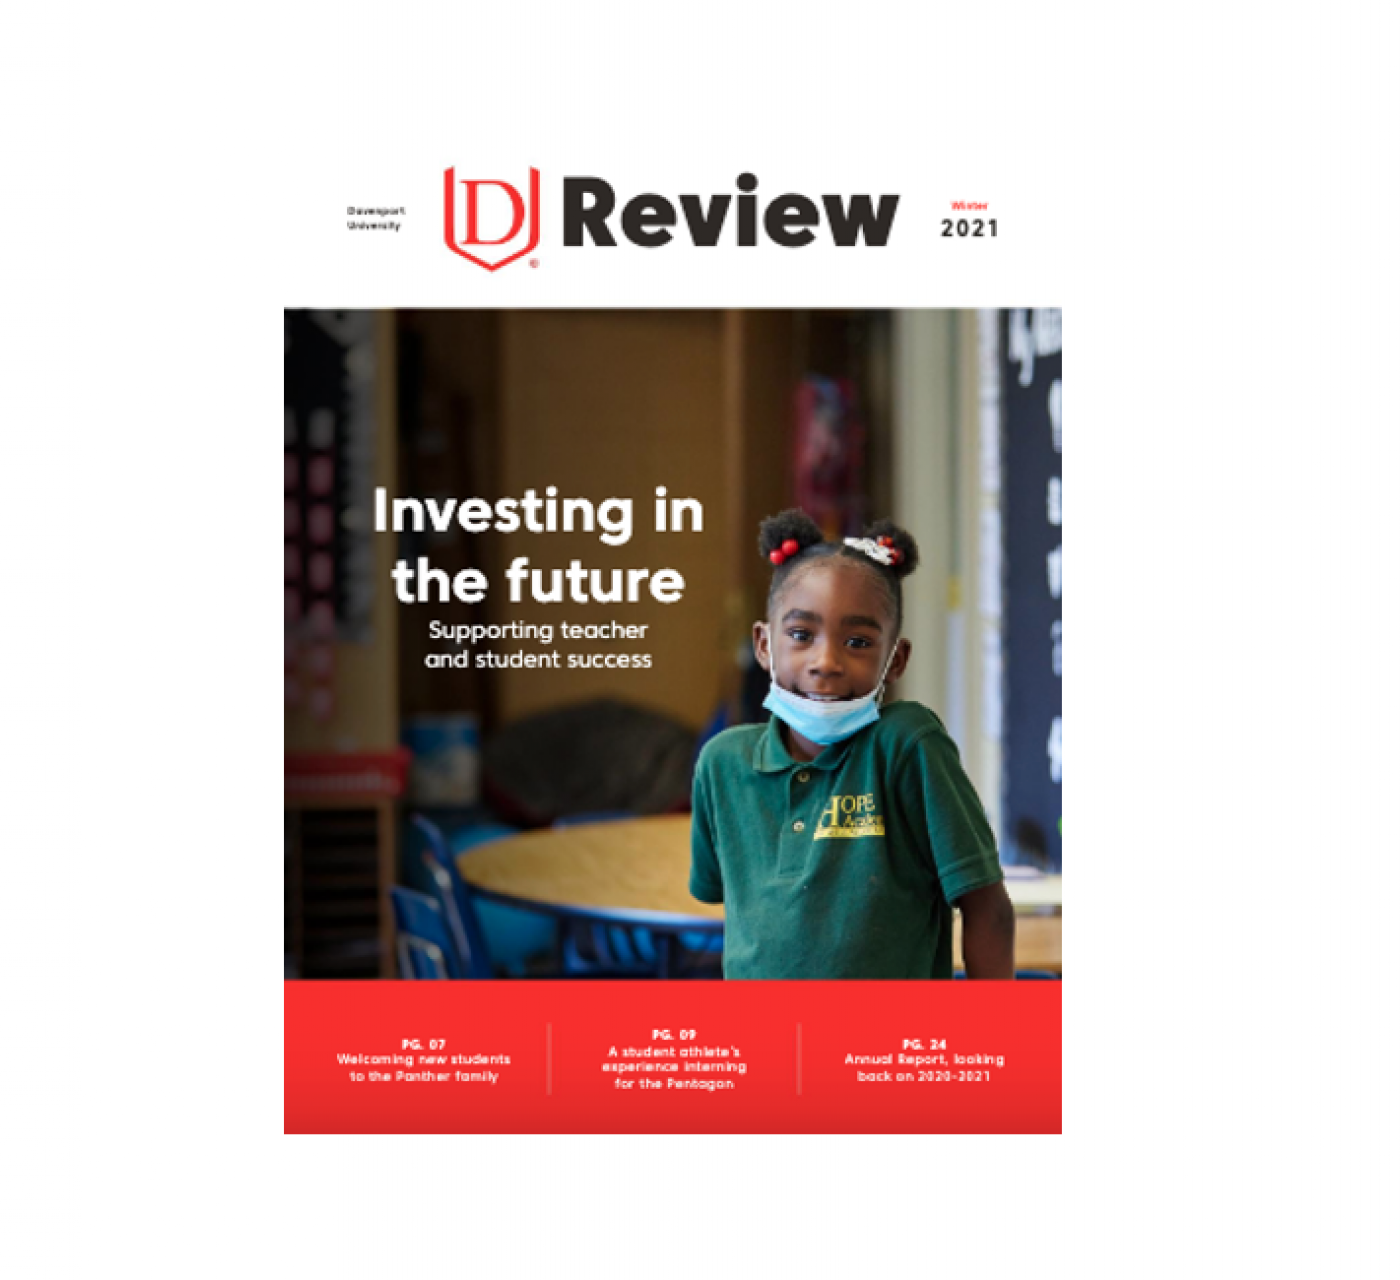 DU Review 2021 Fall Annual Report